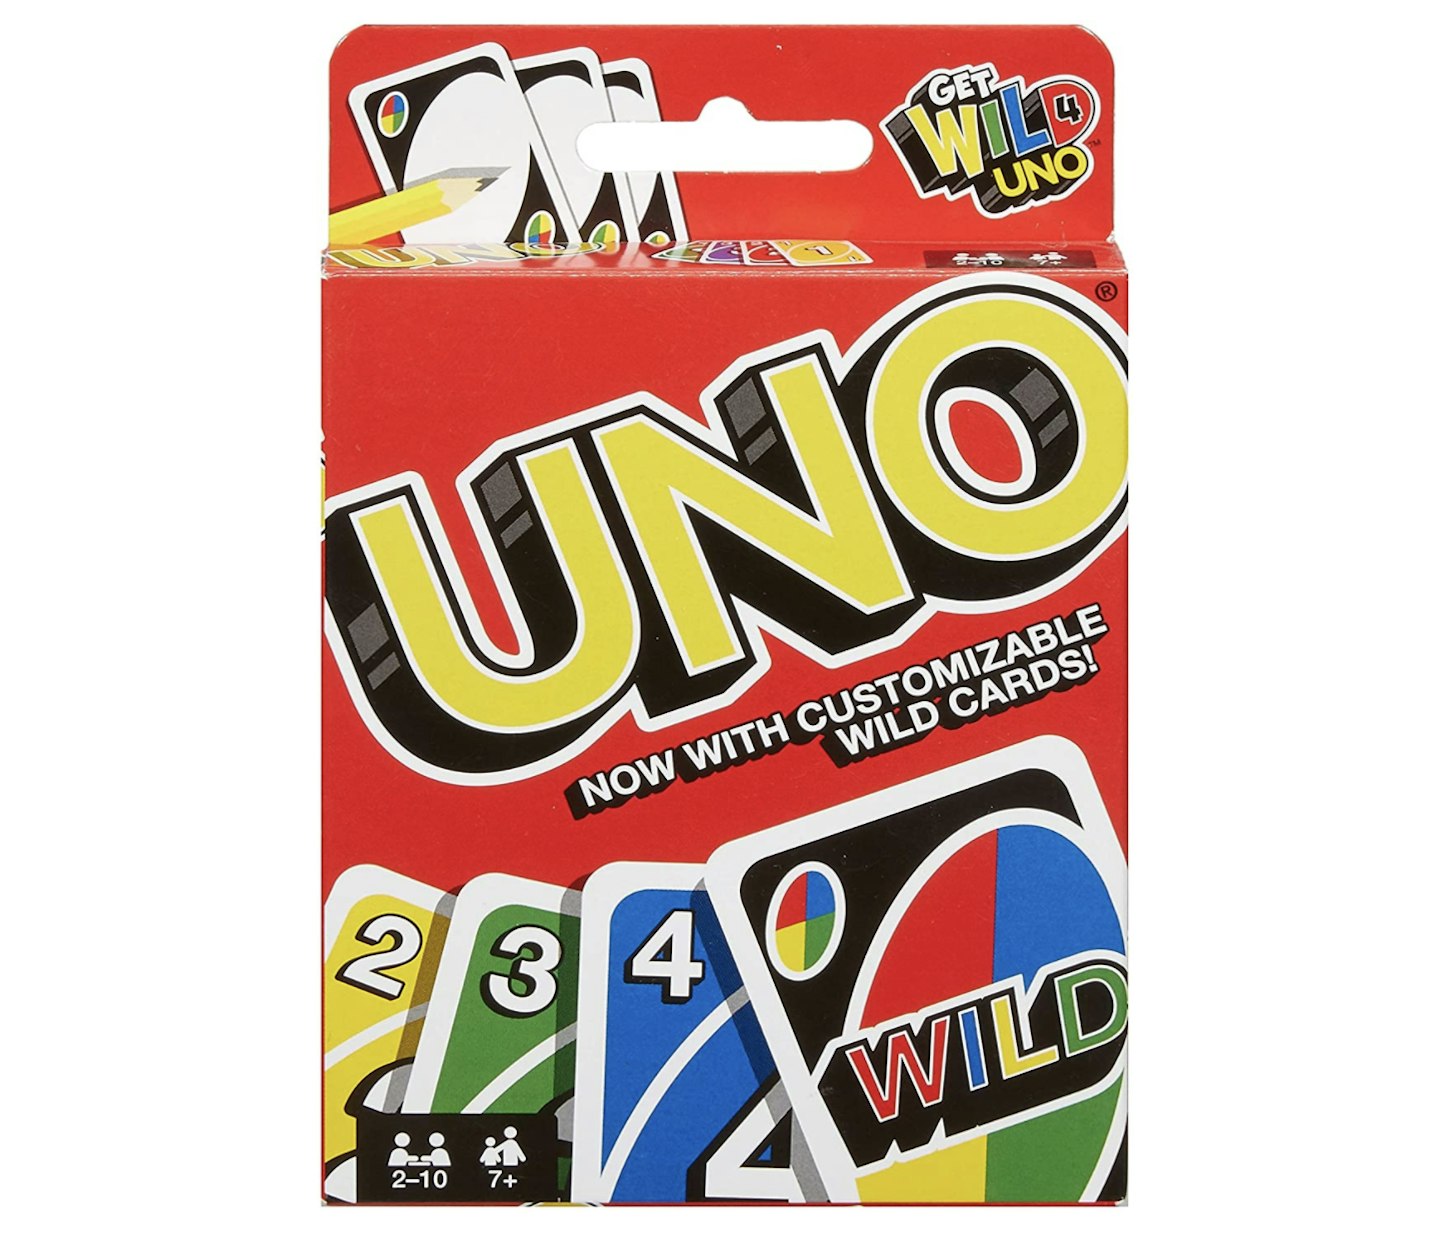 Uno Card Game 1970s toys